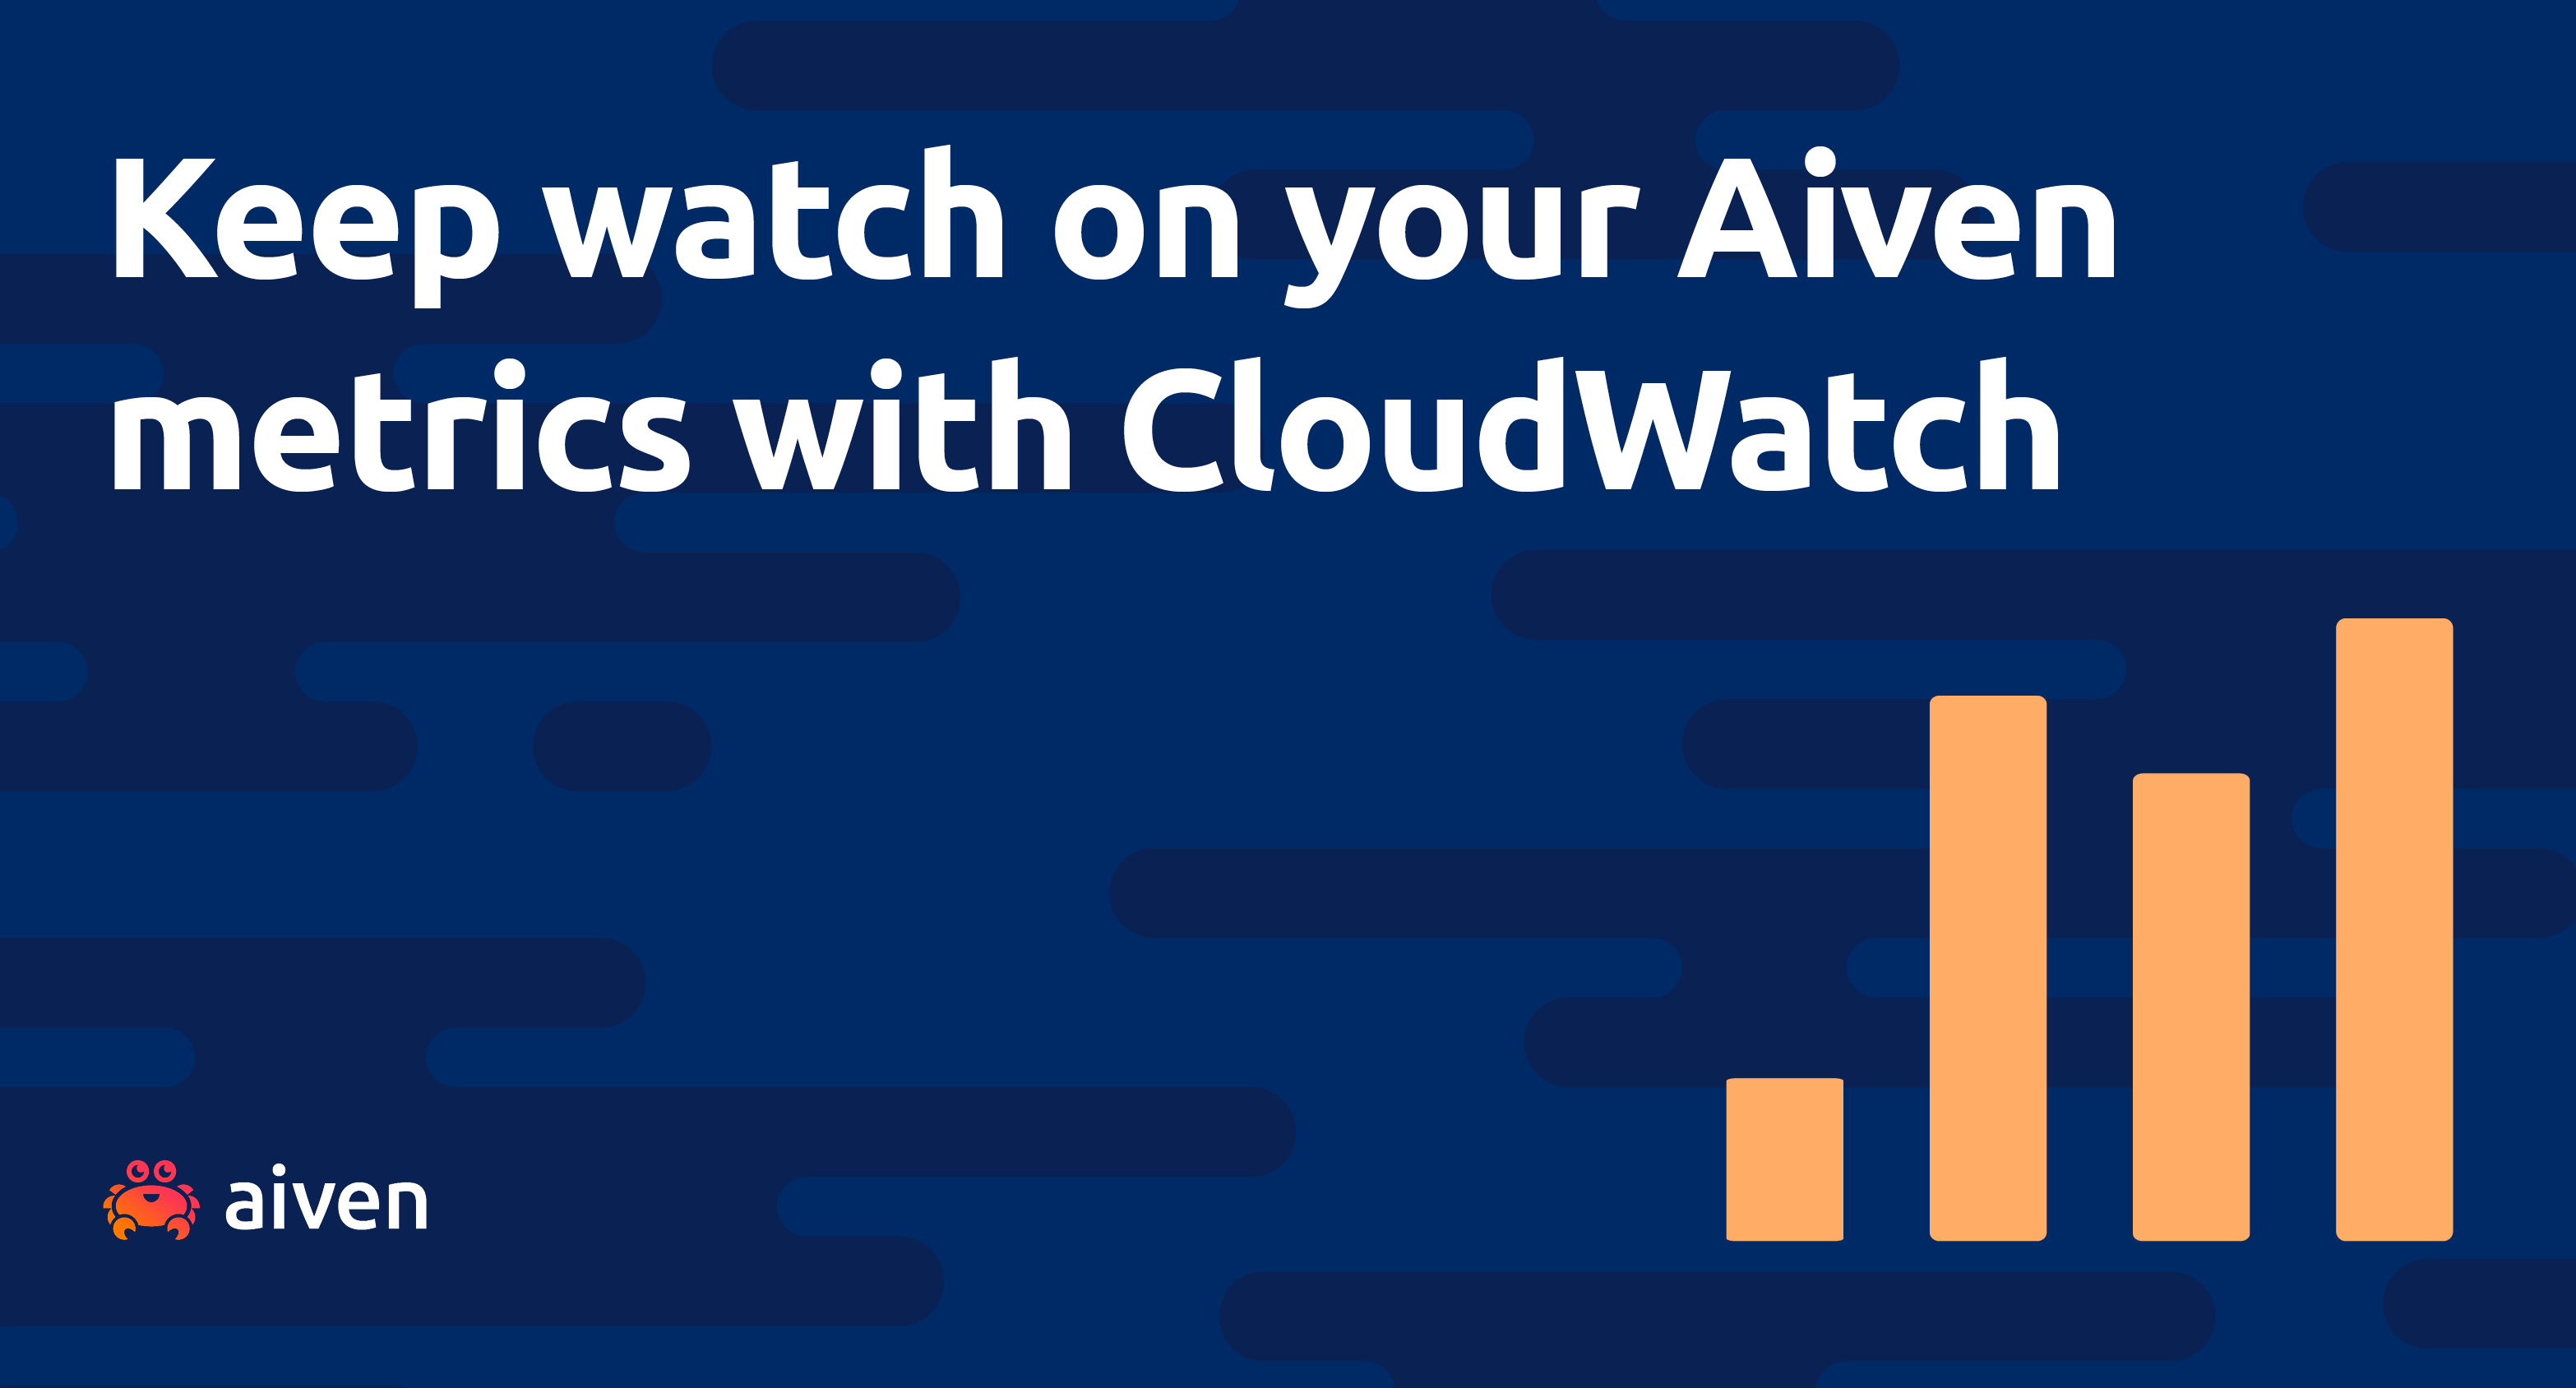 I SEE YOU - Watch your Aiven metrics with CloudWatch